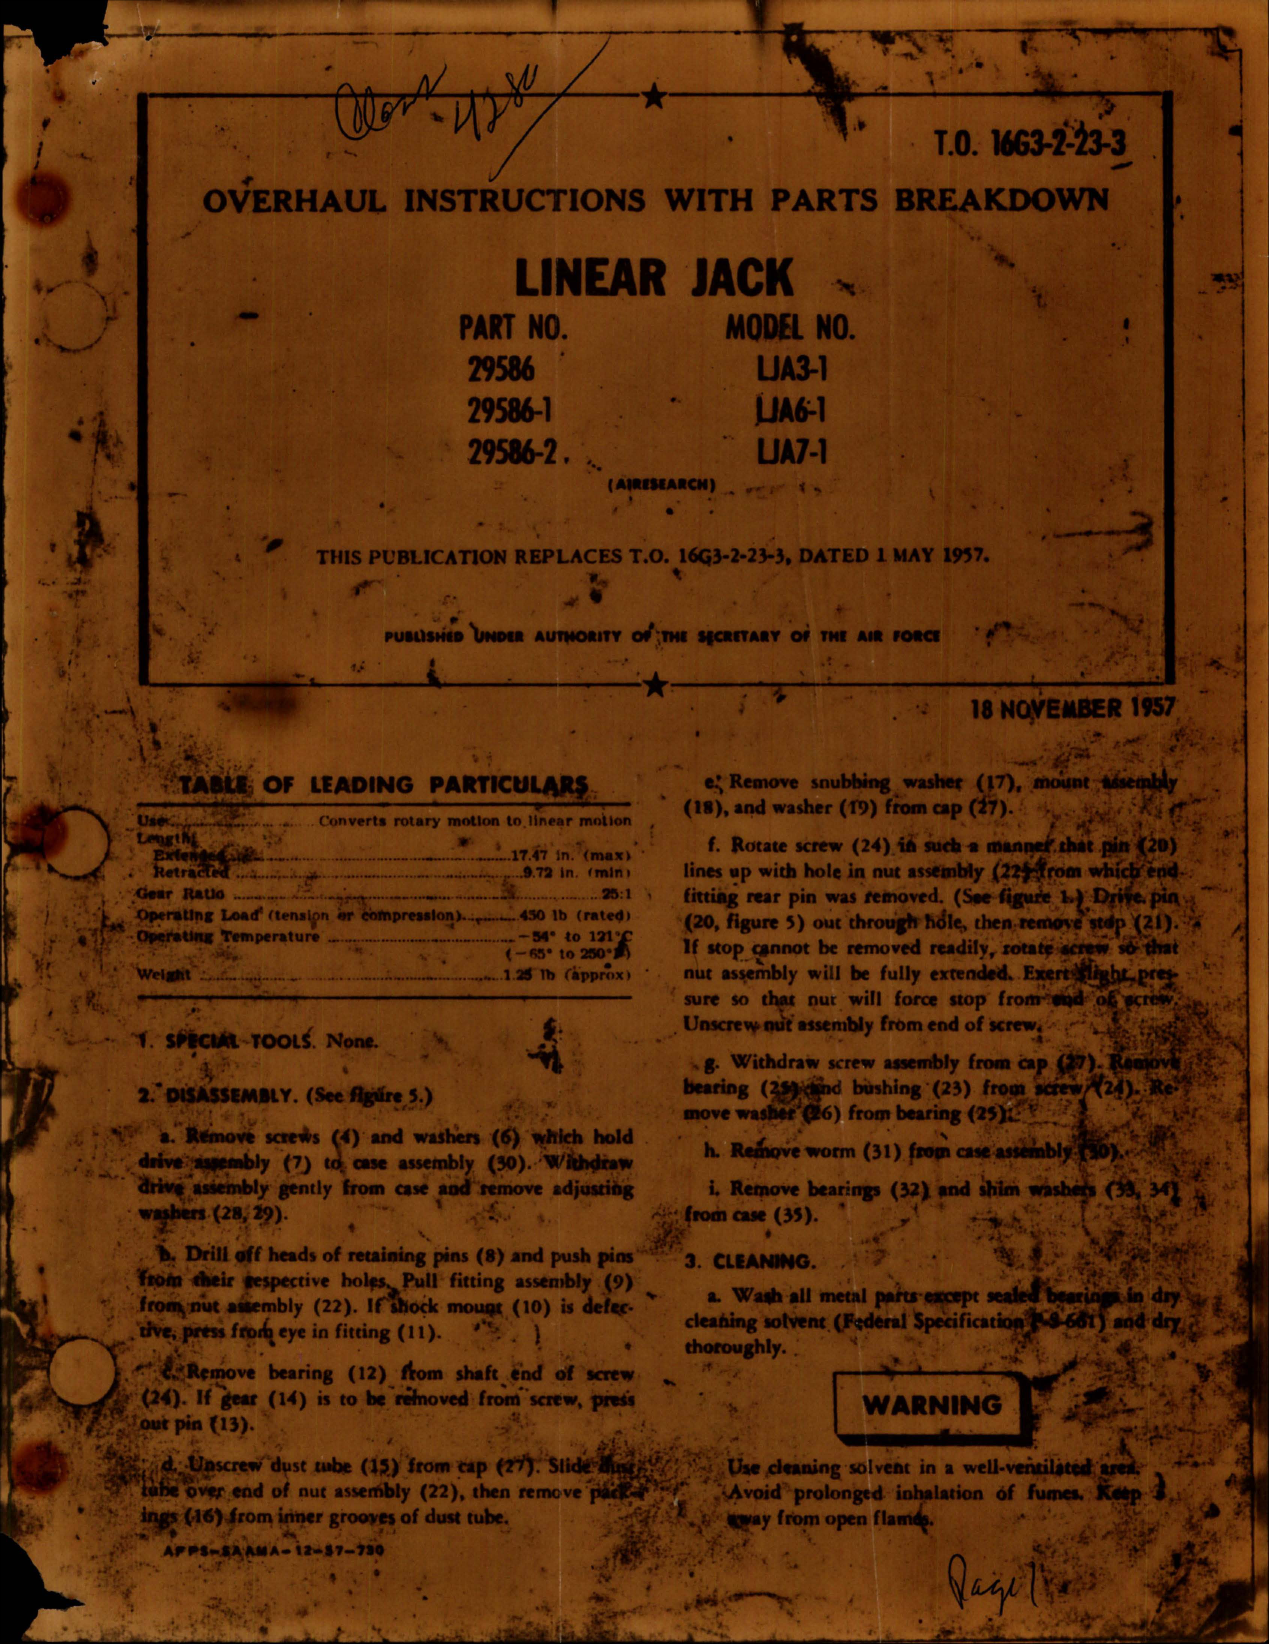 Sample page 1 from AirCorps Library document: Overhaul Instructions with Parts for Linear Jack - Parts 29586, 29586-1 and 29586-2 